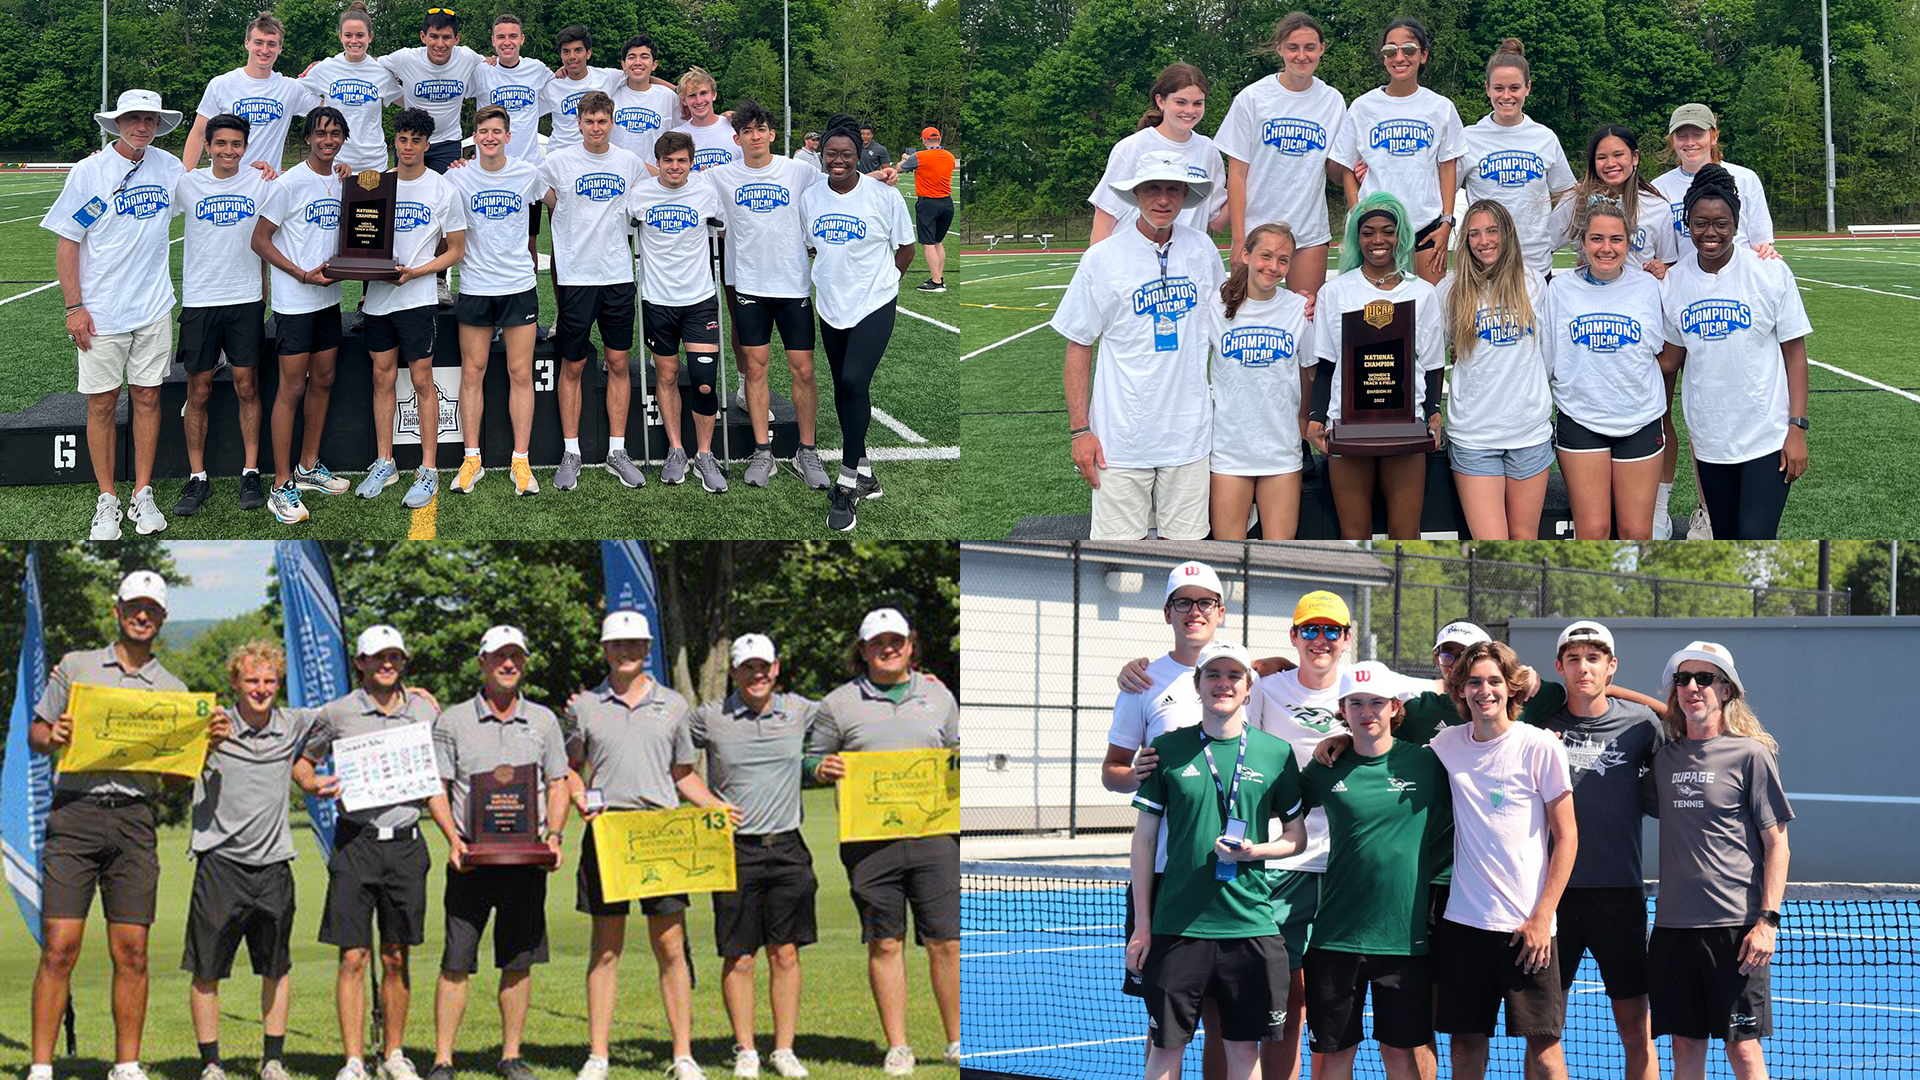 (Images courtesy of College of DuPage athletics & NJCAA)